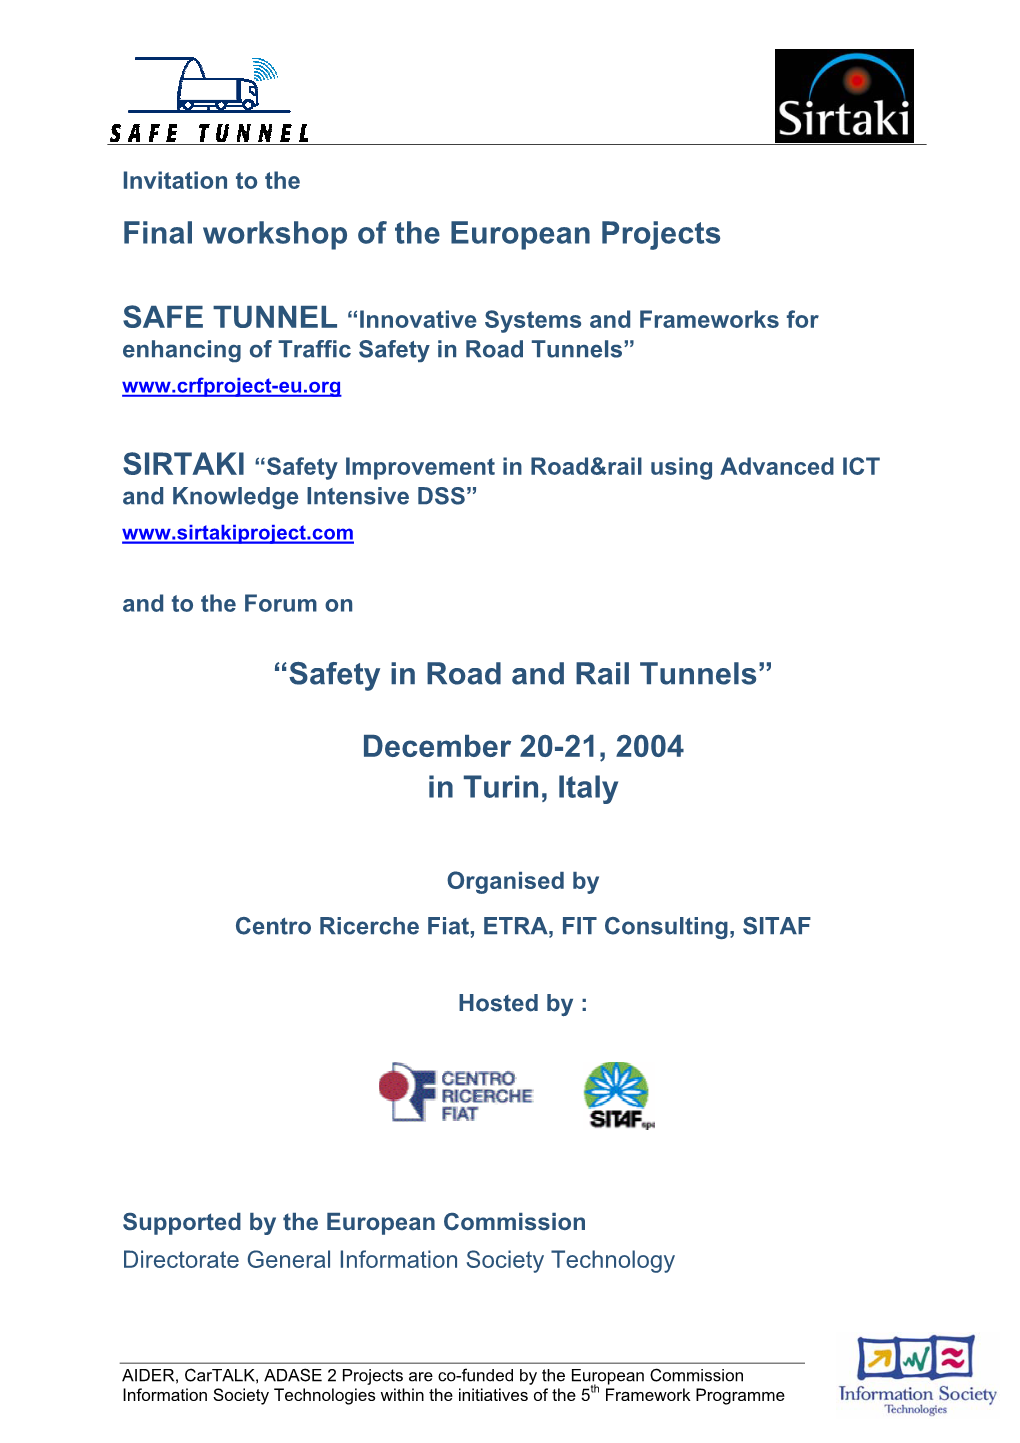 Final Workshop of the European Projects “Safety In